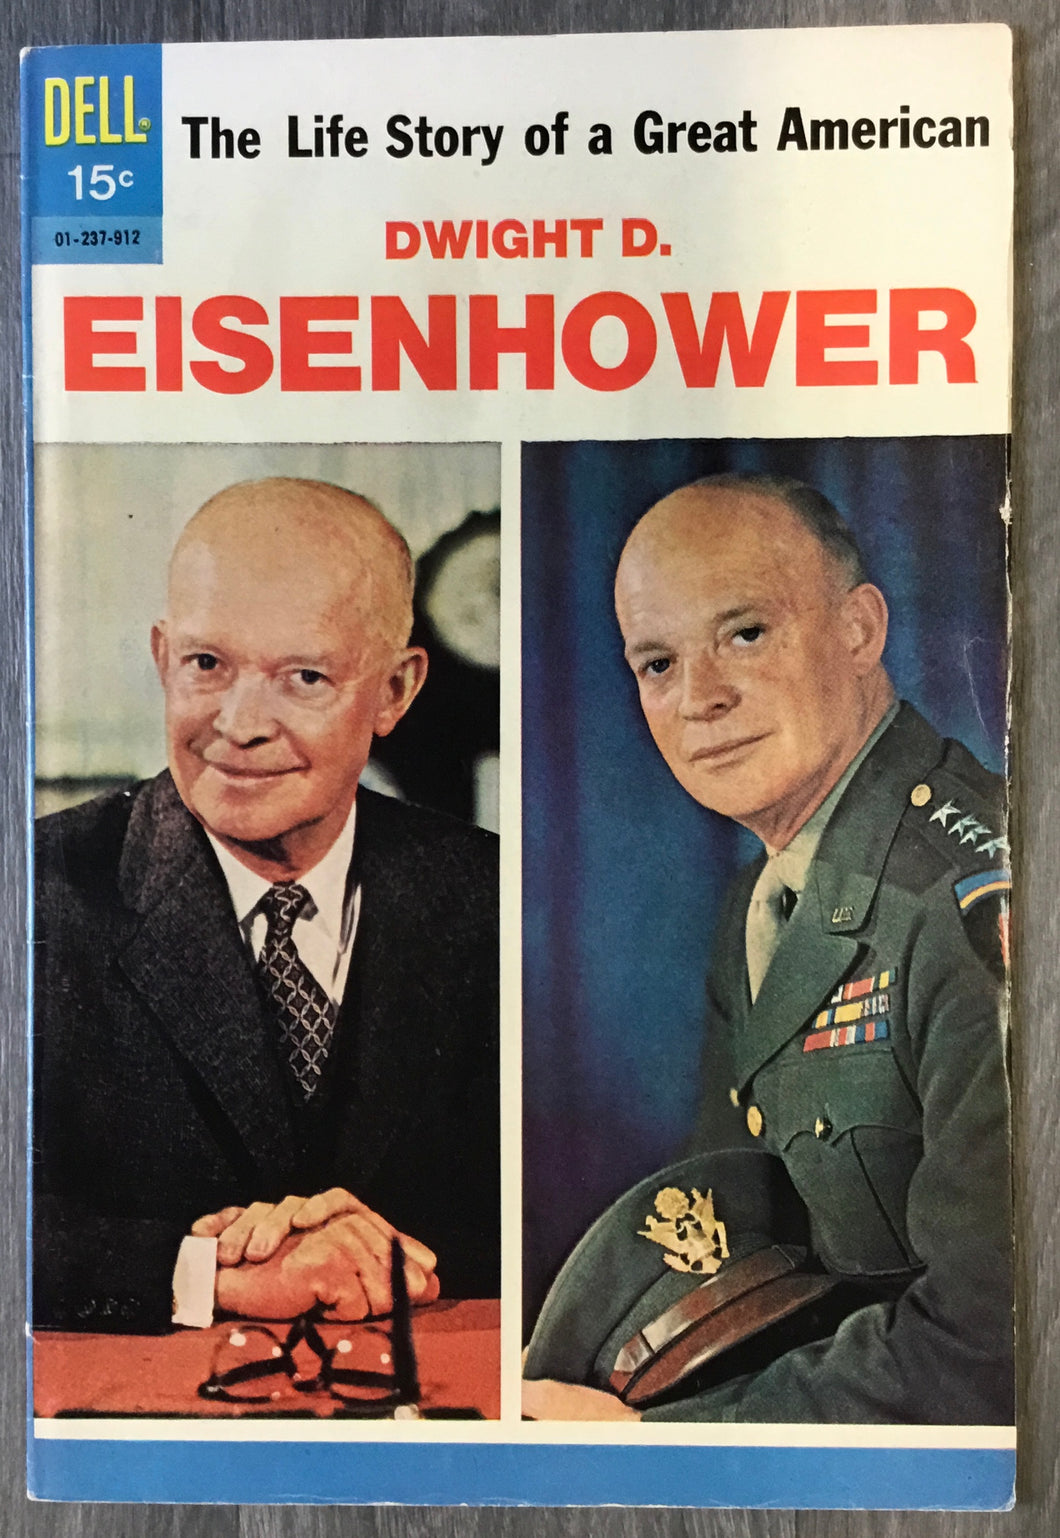 Dwight D. Eisenhower the Life Story of a Great American c1964 Dell Publishing